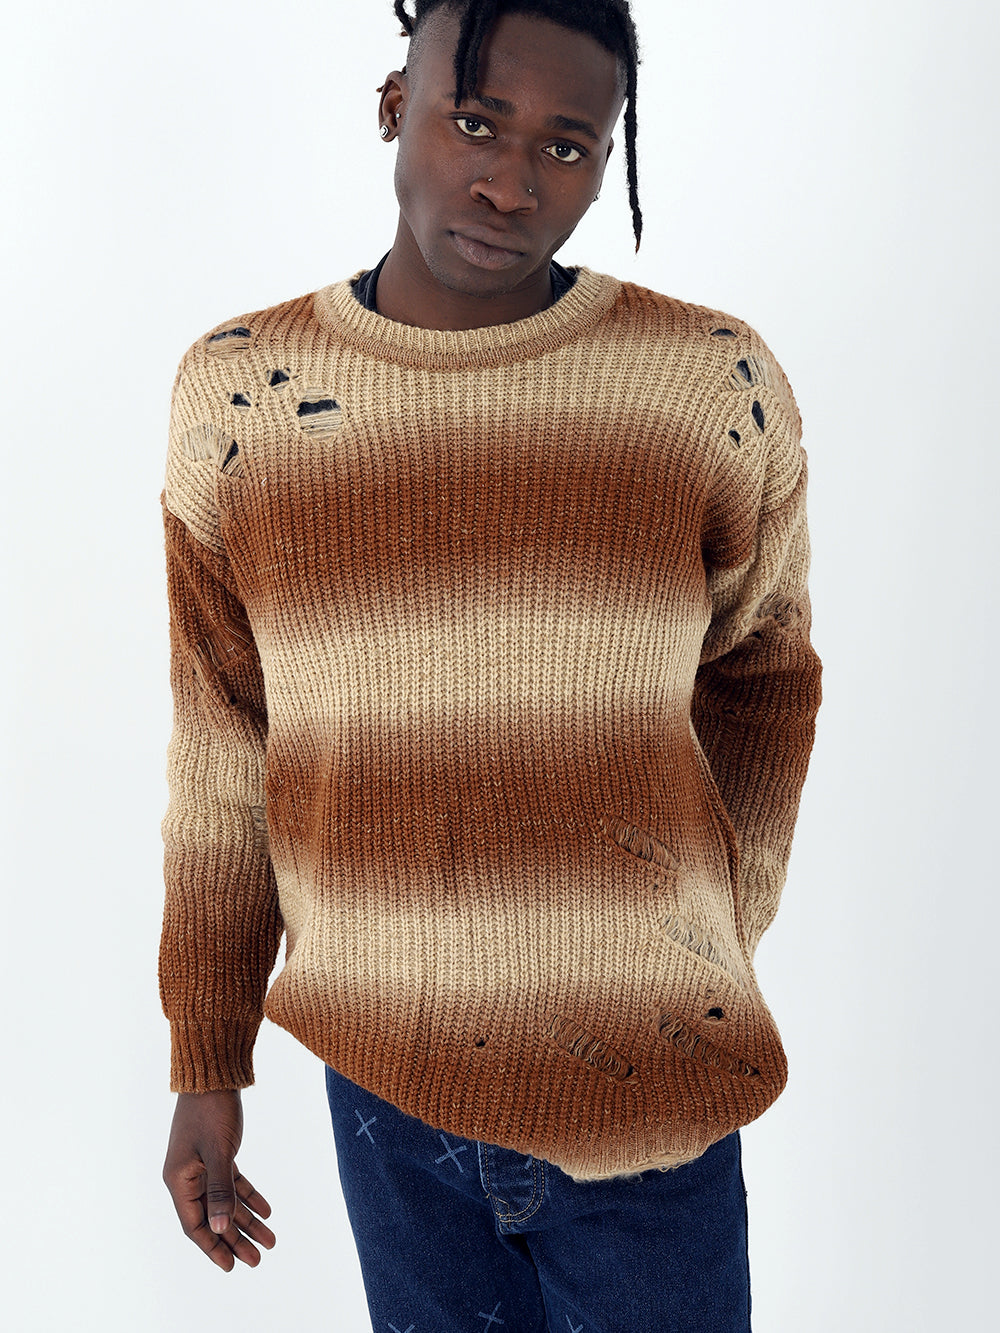 A man wearing the Distressed Gentleman Sweater | Brown, true to size.